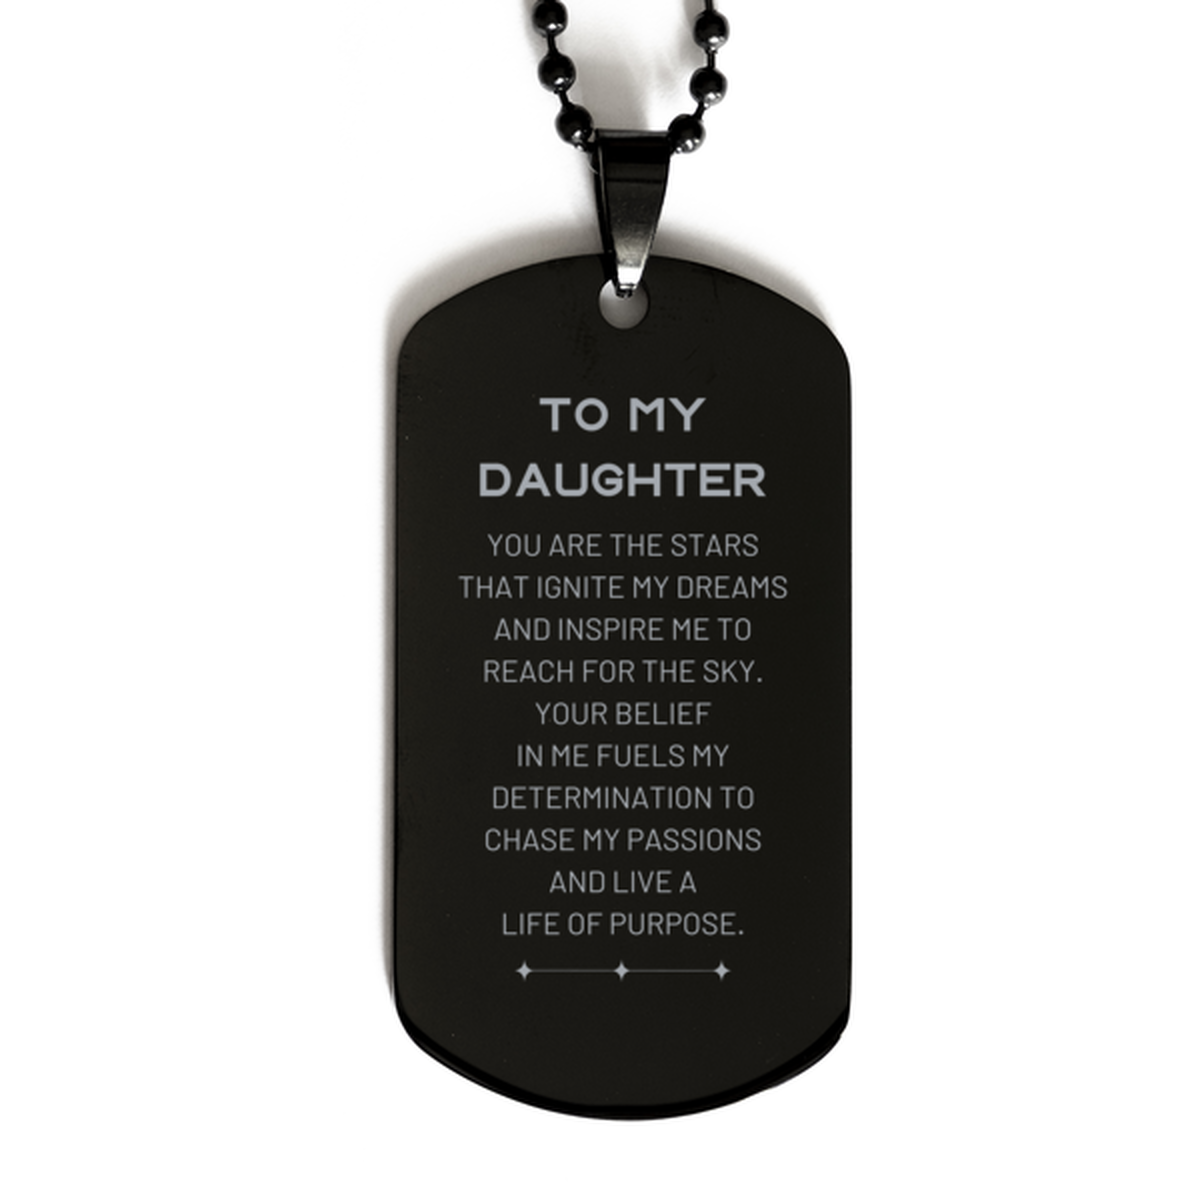 To My Daughter Black Dog Tag, You are the stars that ignite my dreams and inspire me to reach for the sky, Birthday Unique Gifts For Daughter, Thank You Gifts For Daughter